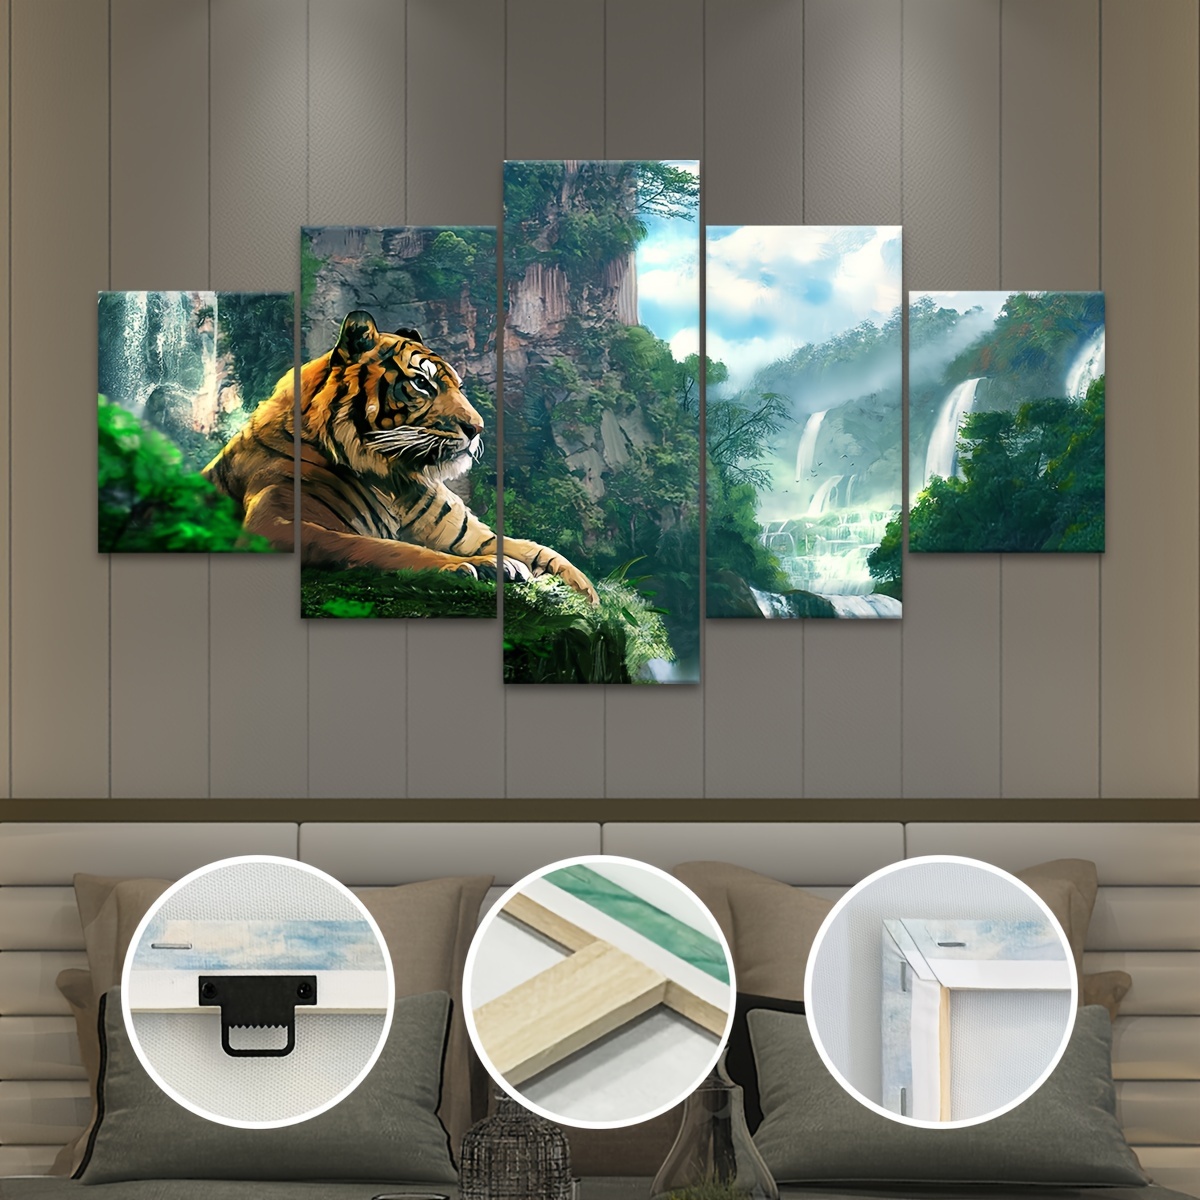 

5pcs Wooden Framed Canvas Poster, Modern Art, Forest Animal Tiger Canvas Poster, Ideal Gift For Bedroom Living Room Corridor, Wall Art, Wall Decor, Winter Decor, Wall Decor, Room Decoration